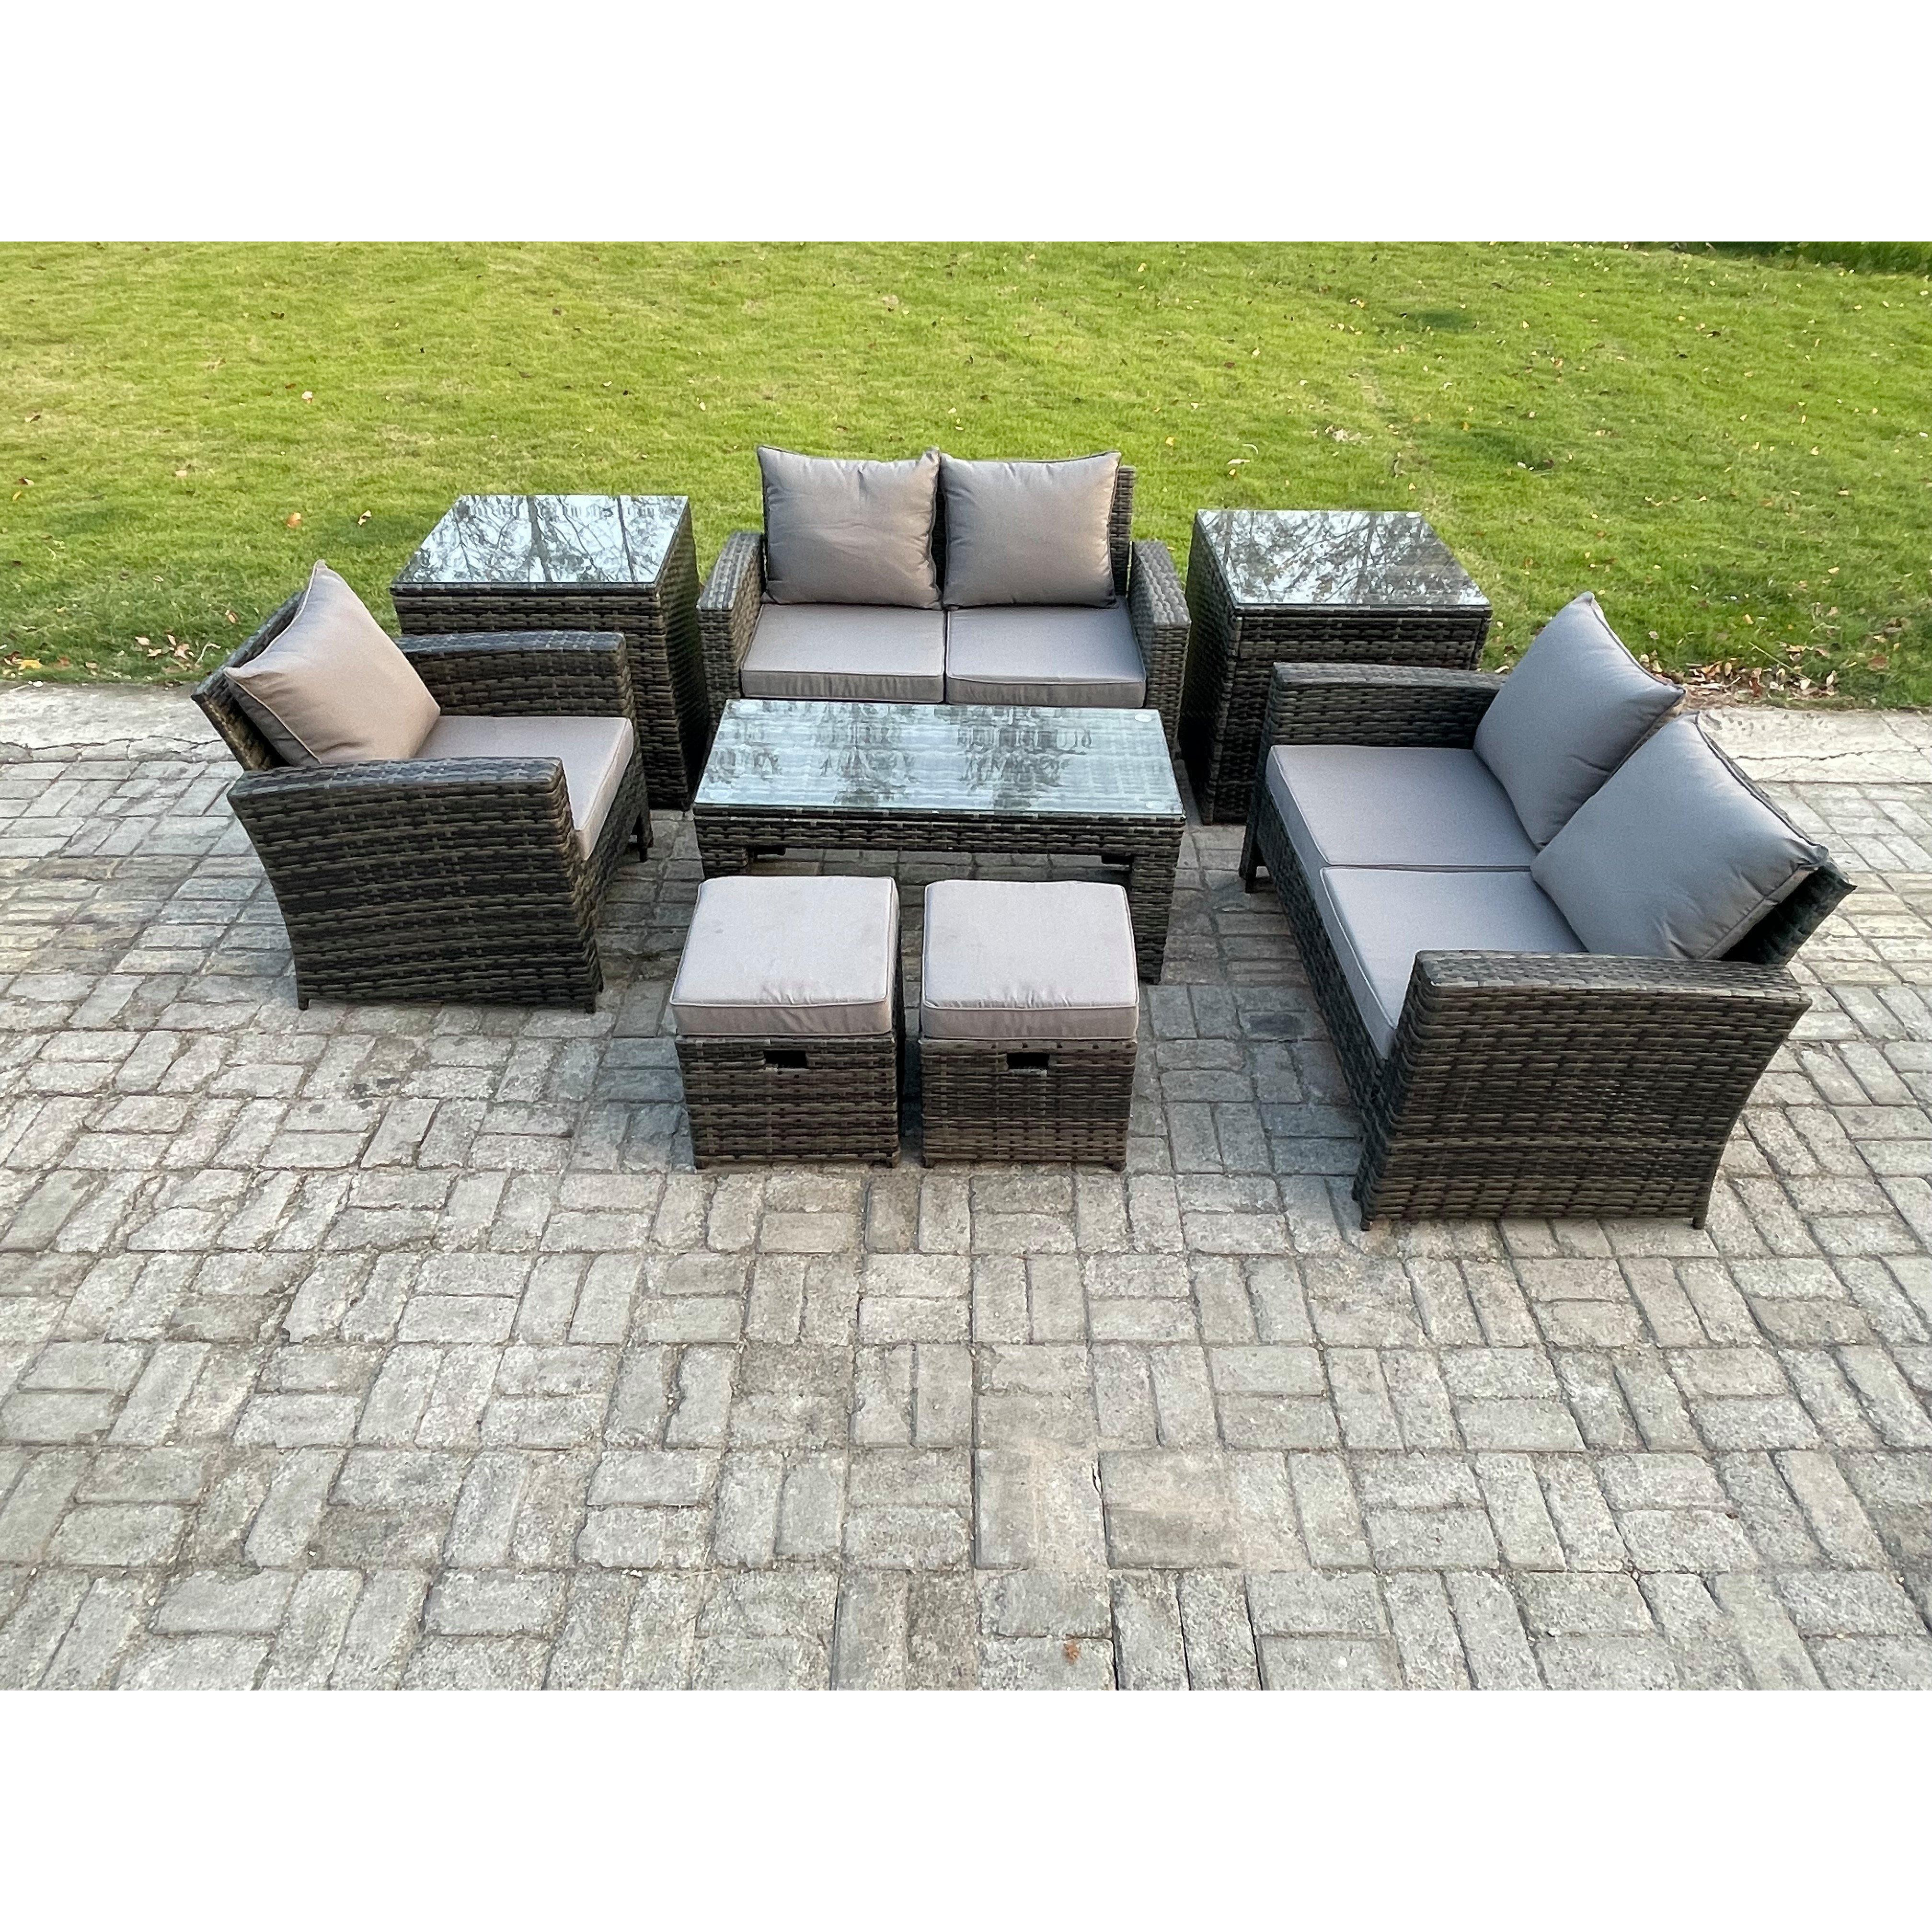 7 Seater Outdoor Rattan Patio Furniture Set Garden Lounge Sofa Set with 2 Side Tables 2 Small Footstools Coffee Table Dark Grey Mixed - image 1